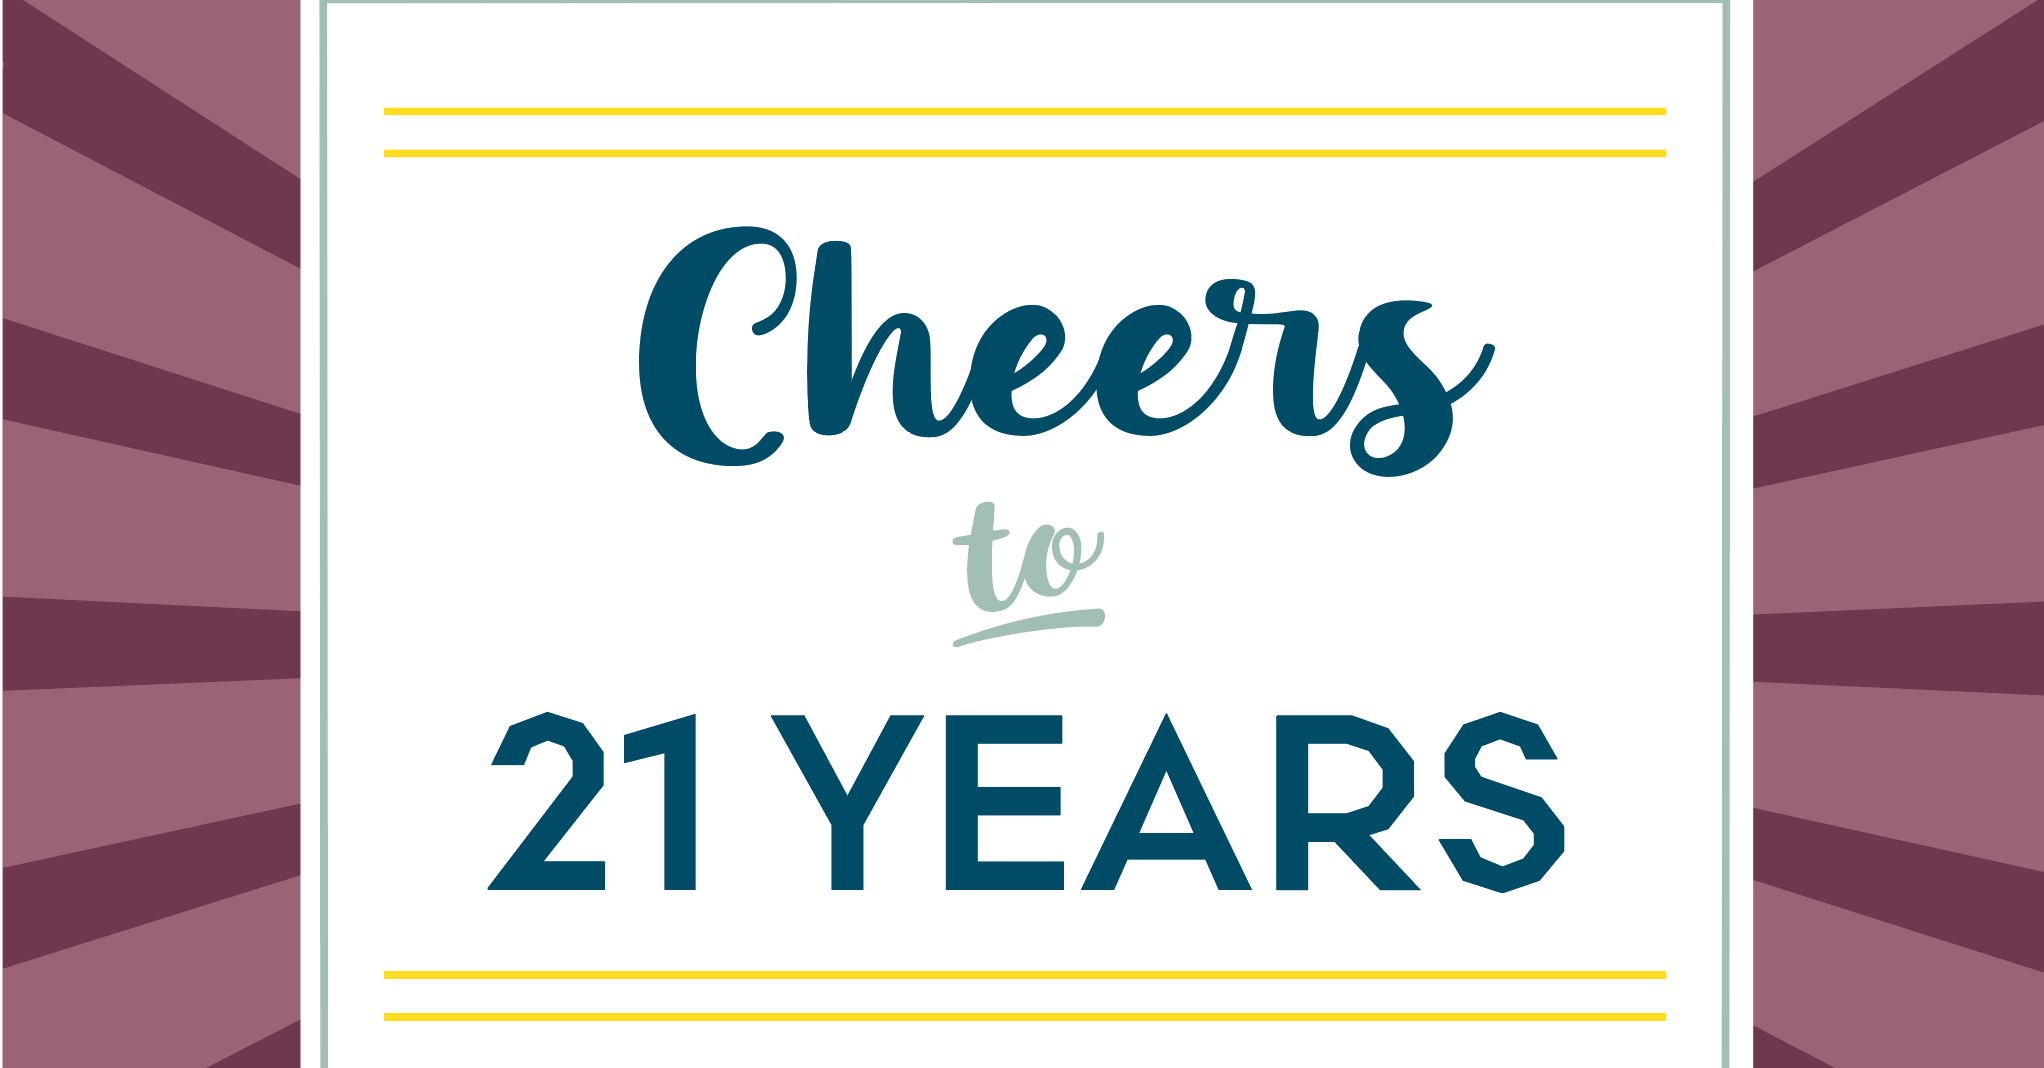 Cheers to 21 Years!